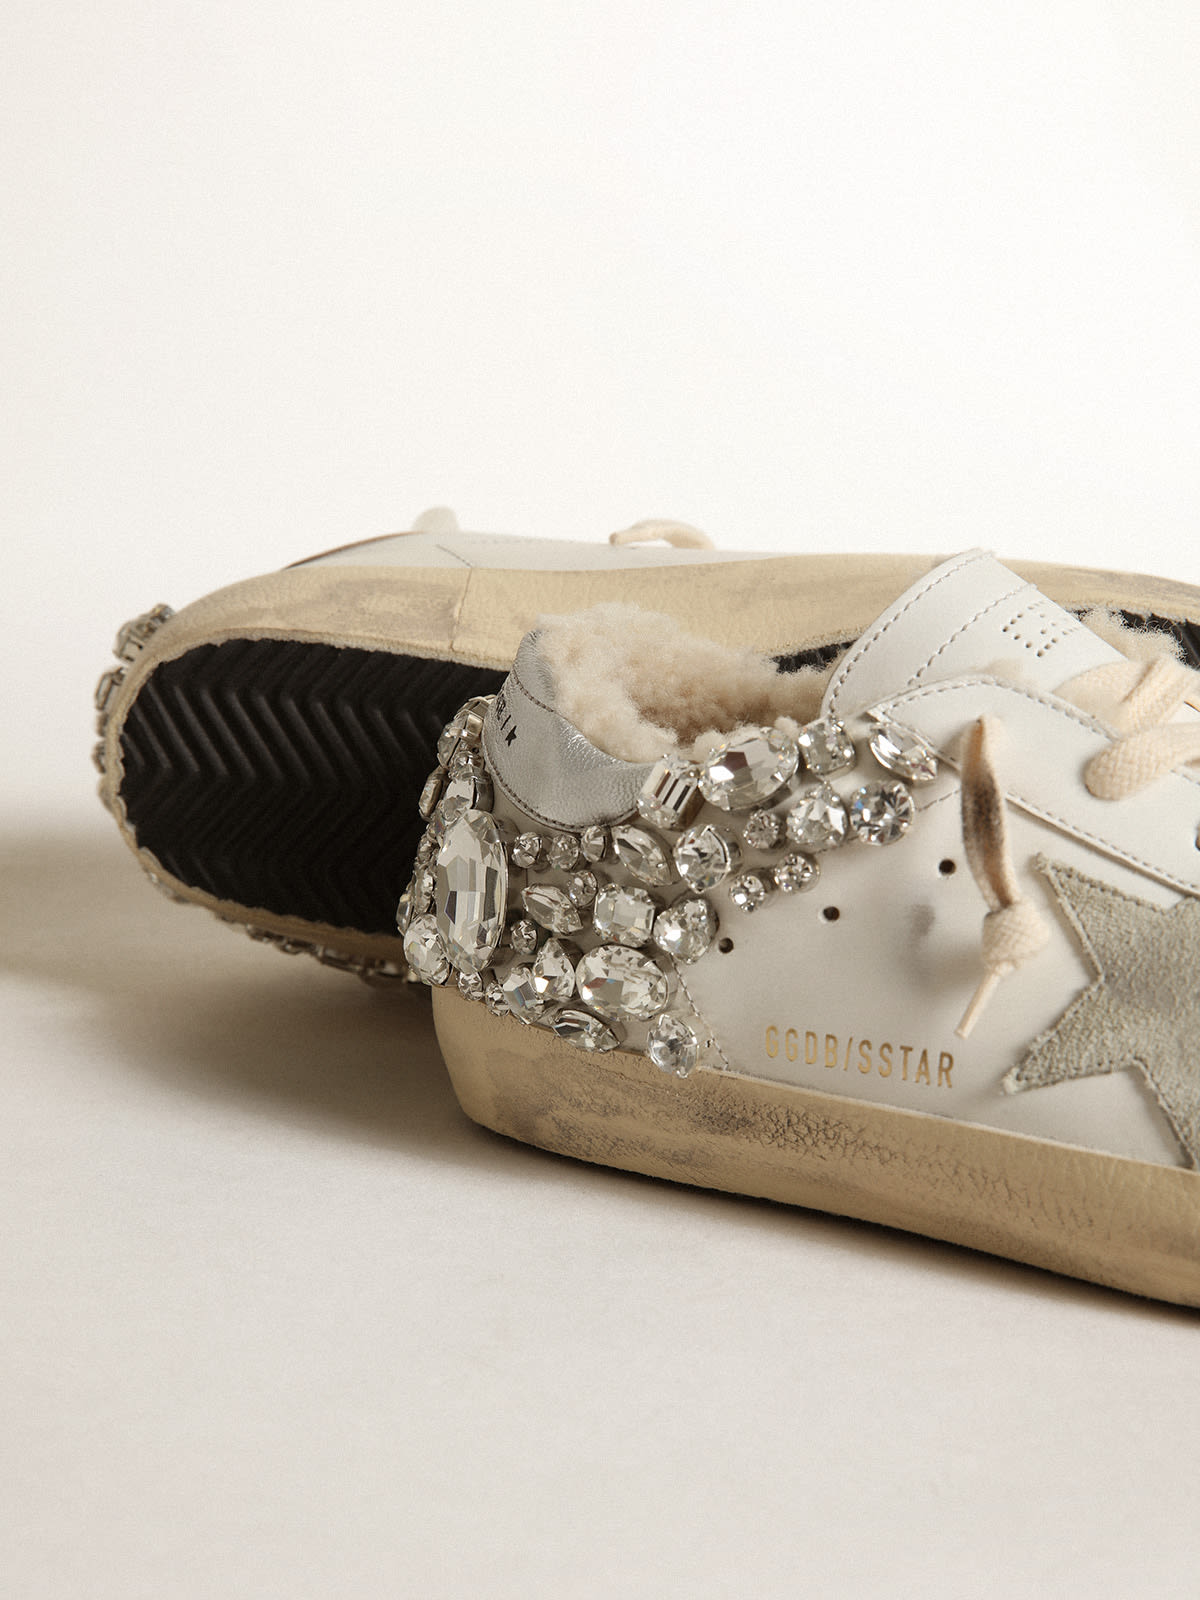 Golden Goose - Super-Star sneakers with shearling lining and decorative crystals in 